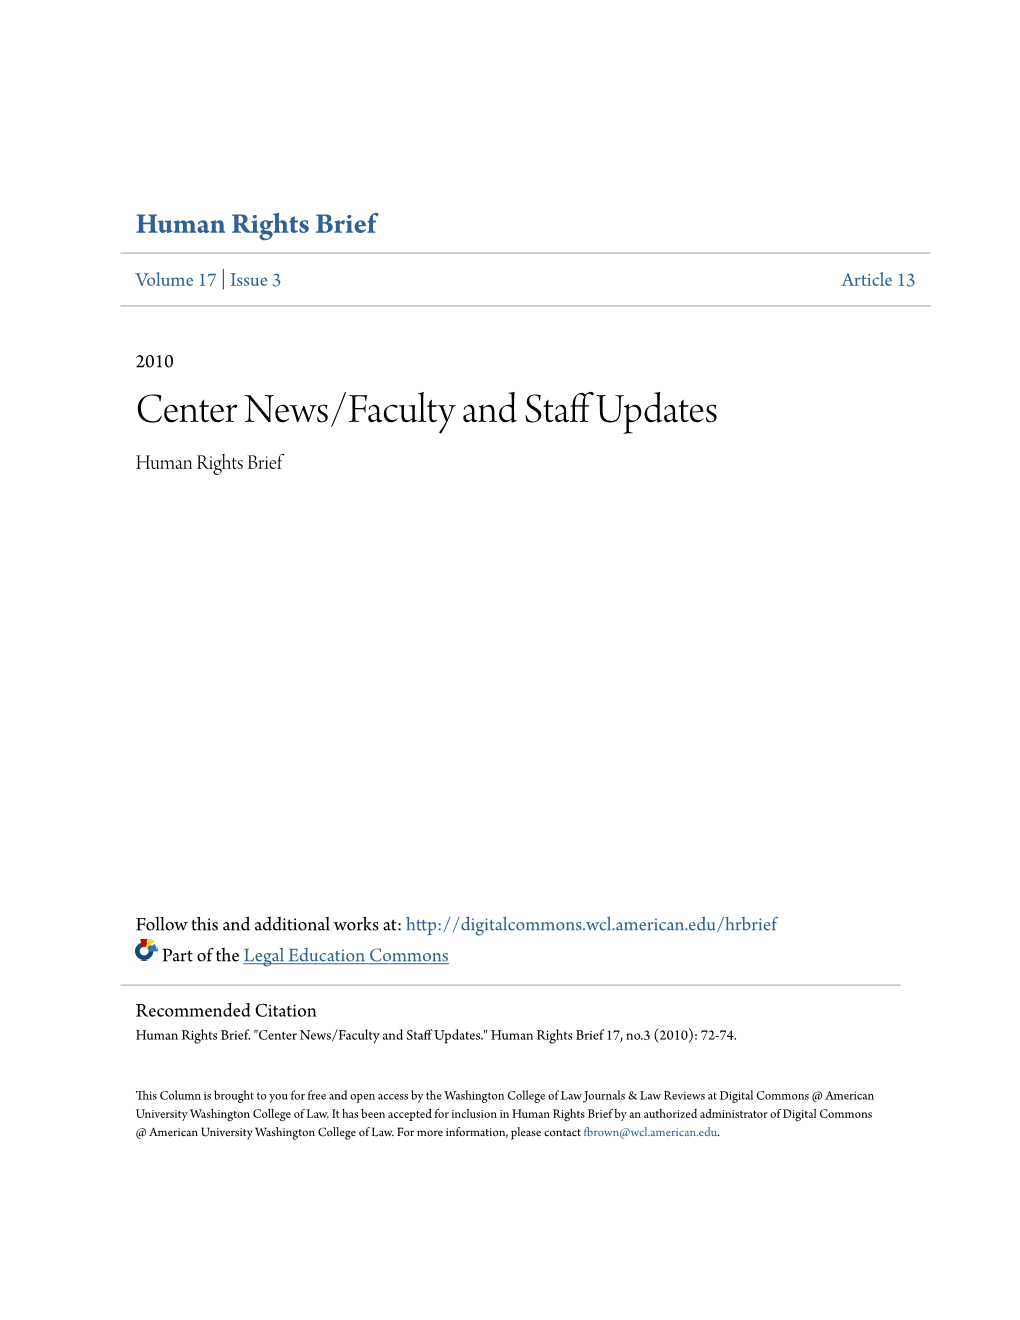 Center News/Faculty and Staff Updates